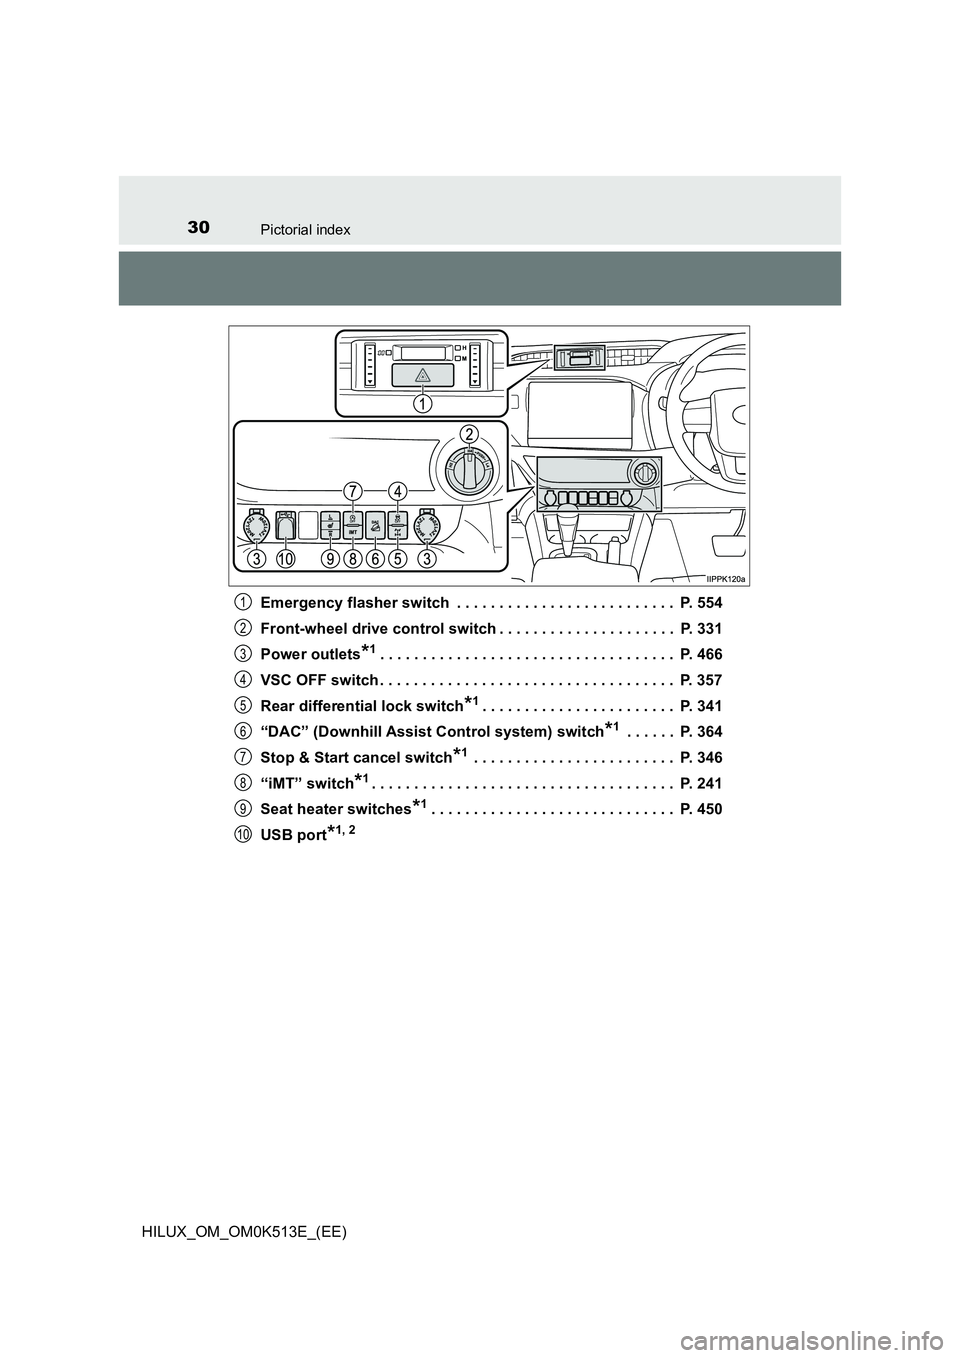 TOYOTA HILUX 2021  Owners Manual (in English) 30Pictorial index
HILUX_OM_OM0K513E_(EE) 
Emergency flasher switch  . . . . . . . . . . . . . . . . . . . . . . . . . .  P. 554 
Front-wheel drive control switch . . . . . . . . . . . . . . . . . . . 